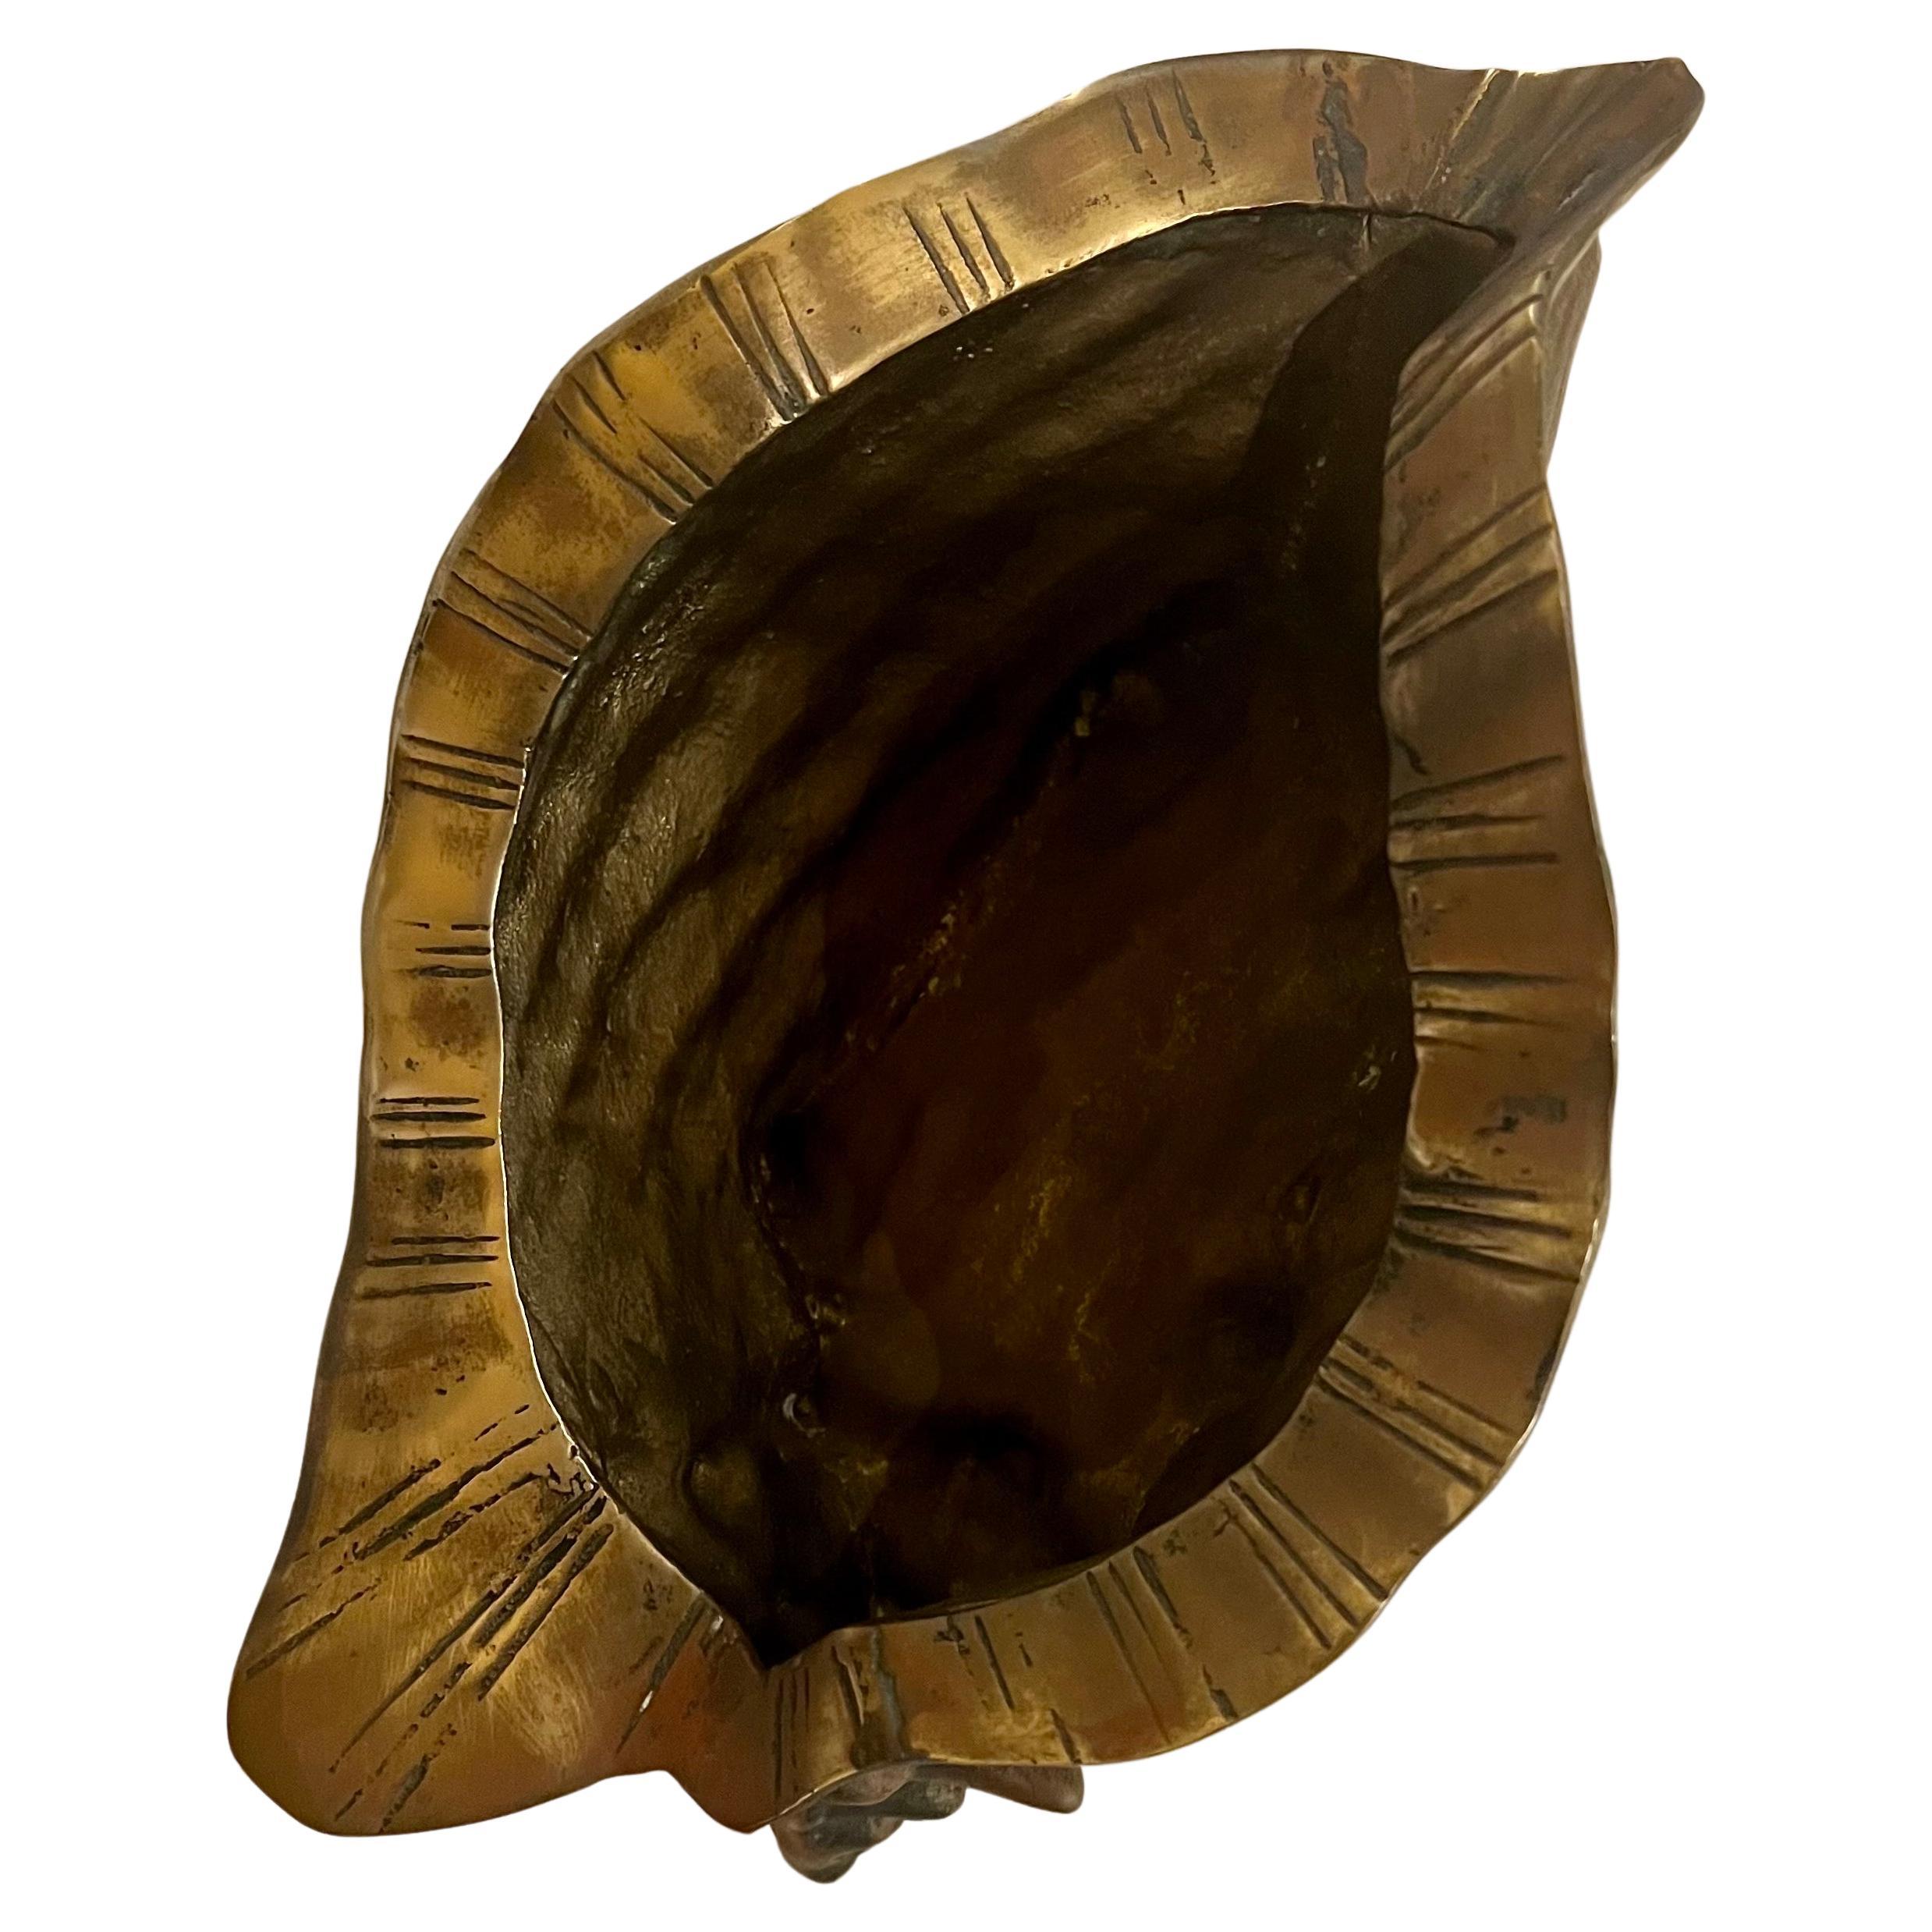 Beautiful decorative solid patinated brass conch, can be used as a planter or catch it all, circa 1970s nice patina that can be polished.